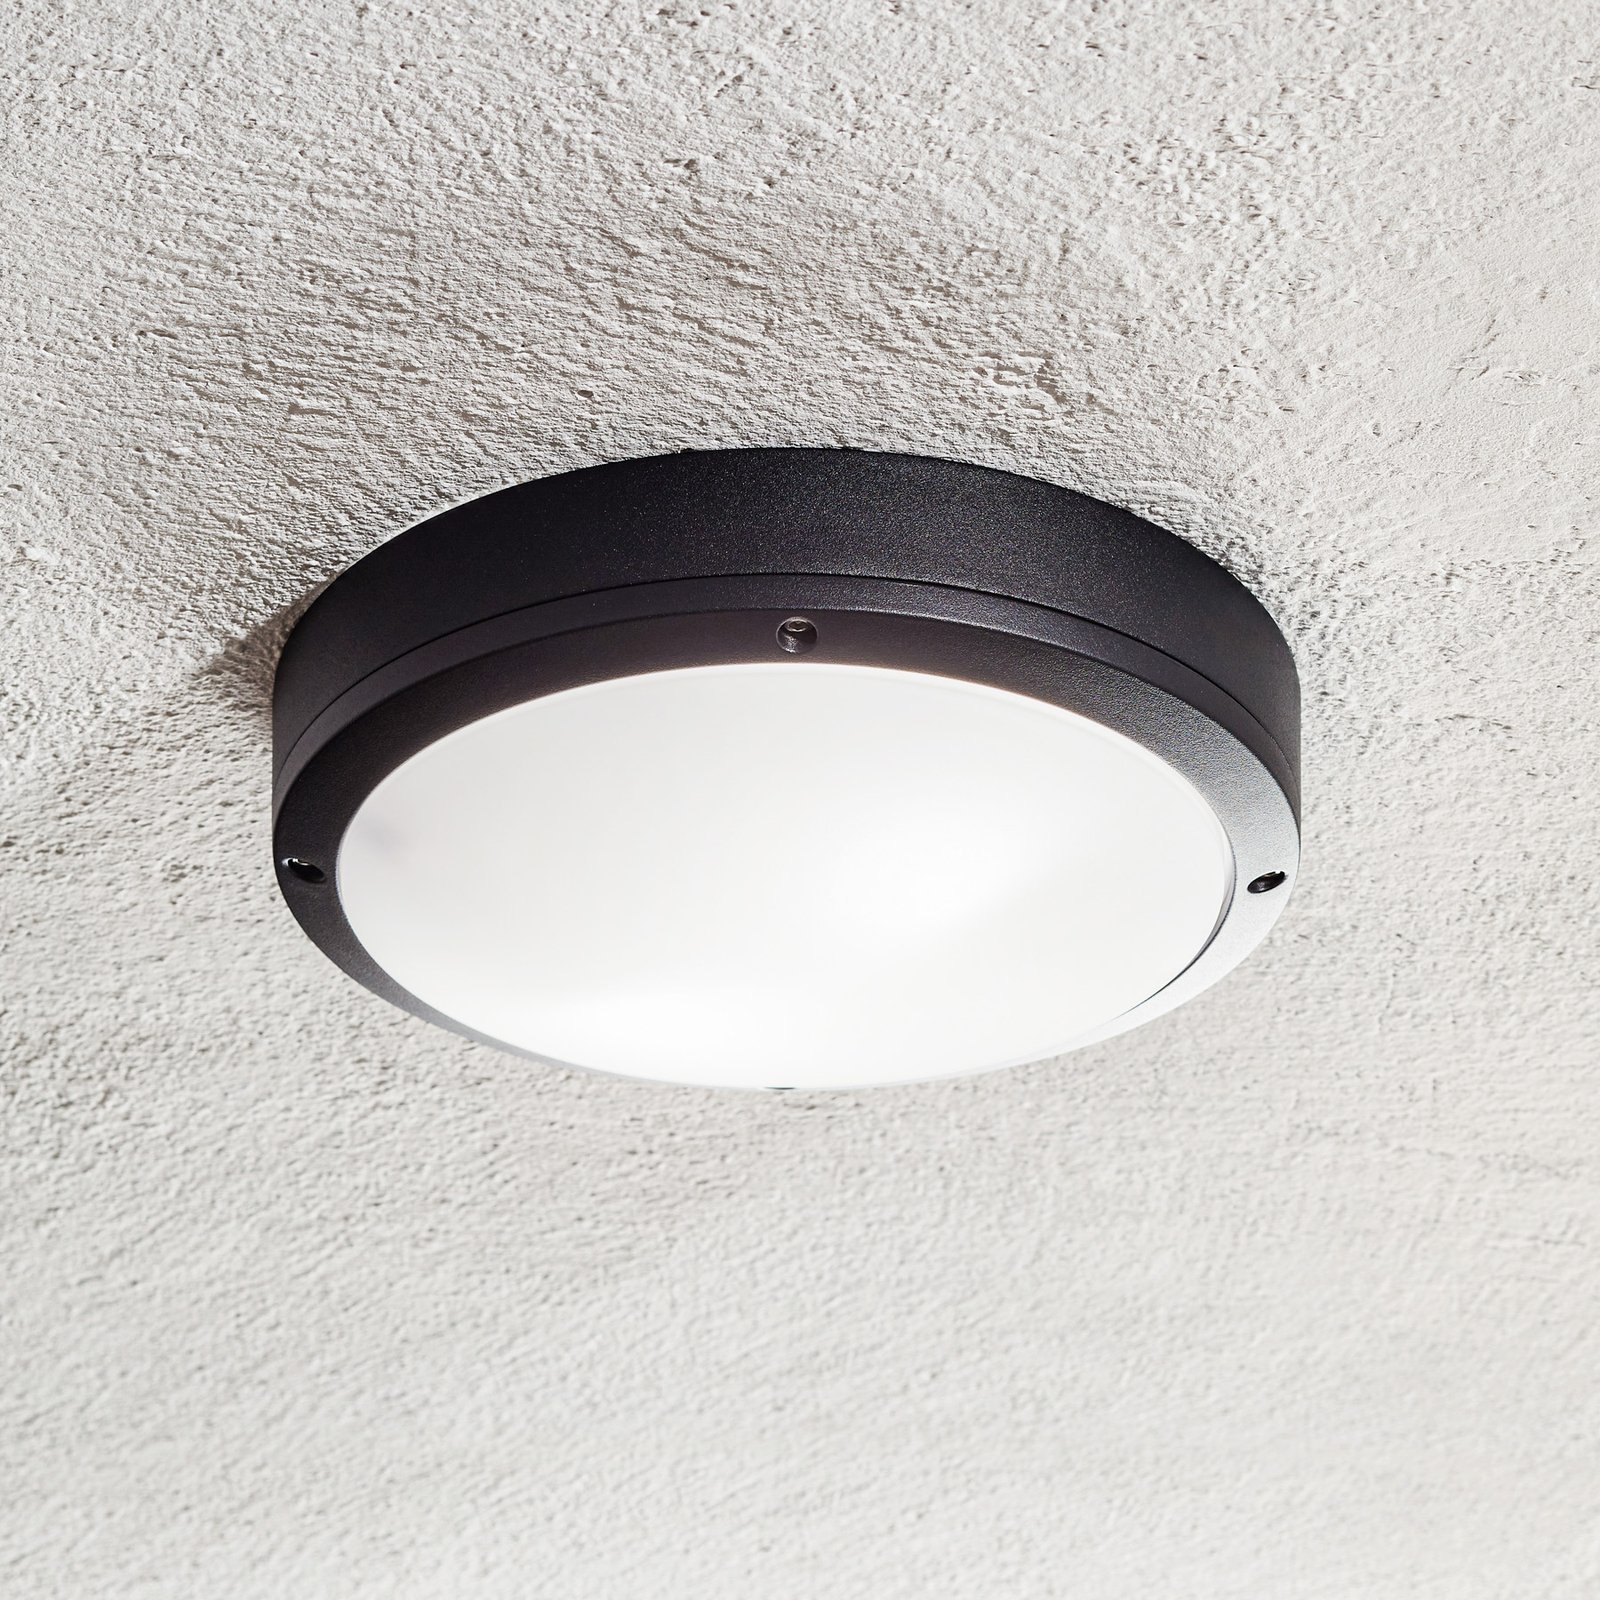 Desi 28 - a ceiling light for outdoors